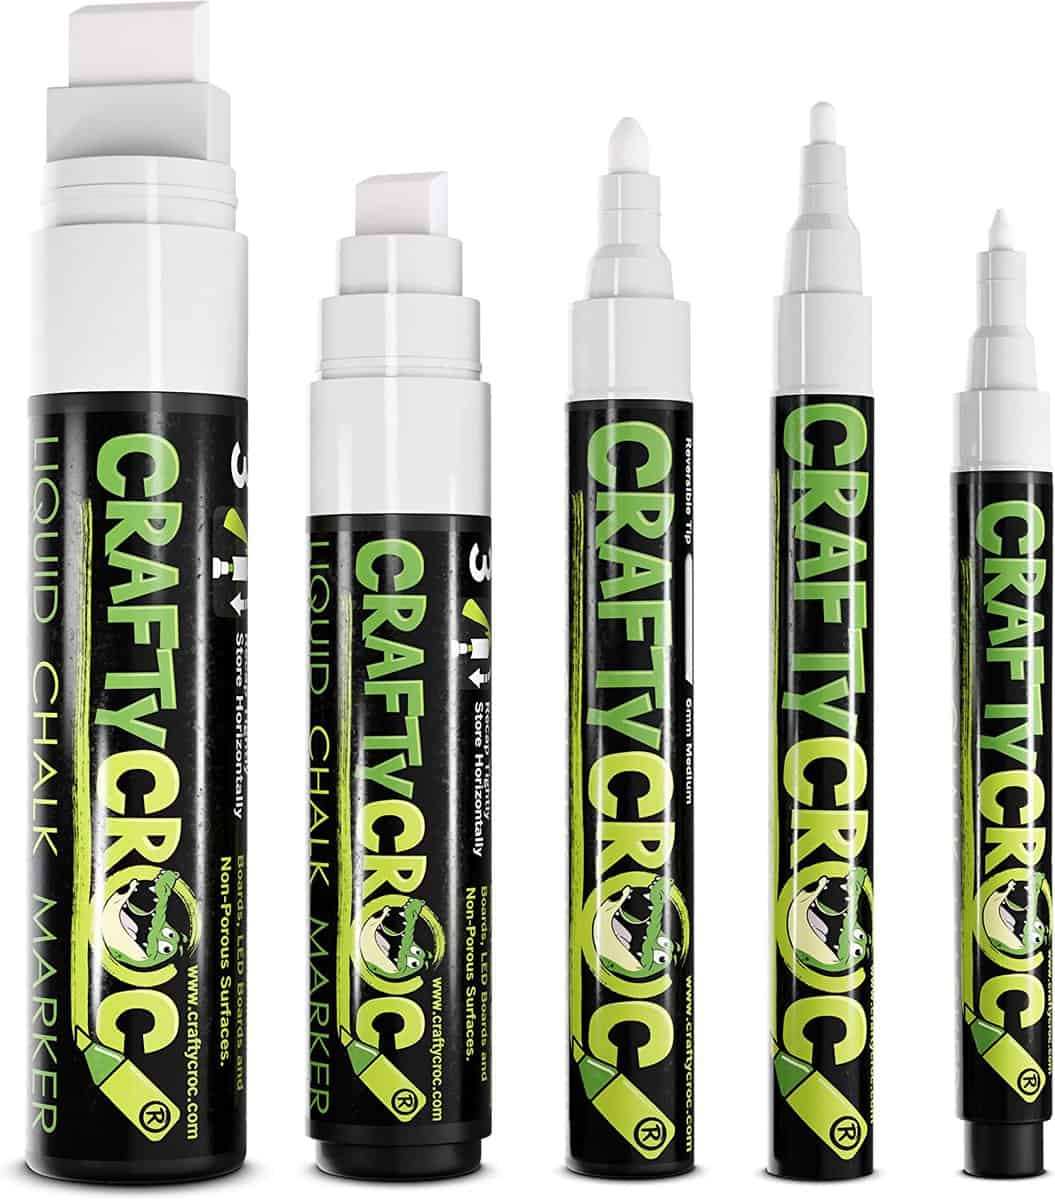 Crafty Croc Liquid Chalk Markers, 10 Pack of Neon Chalk Pens, For